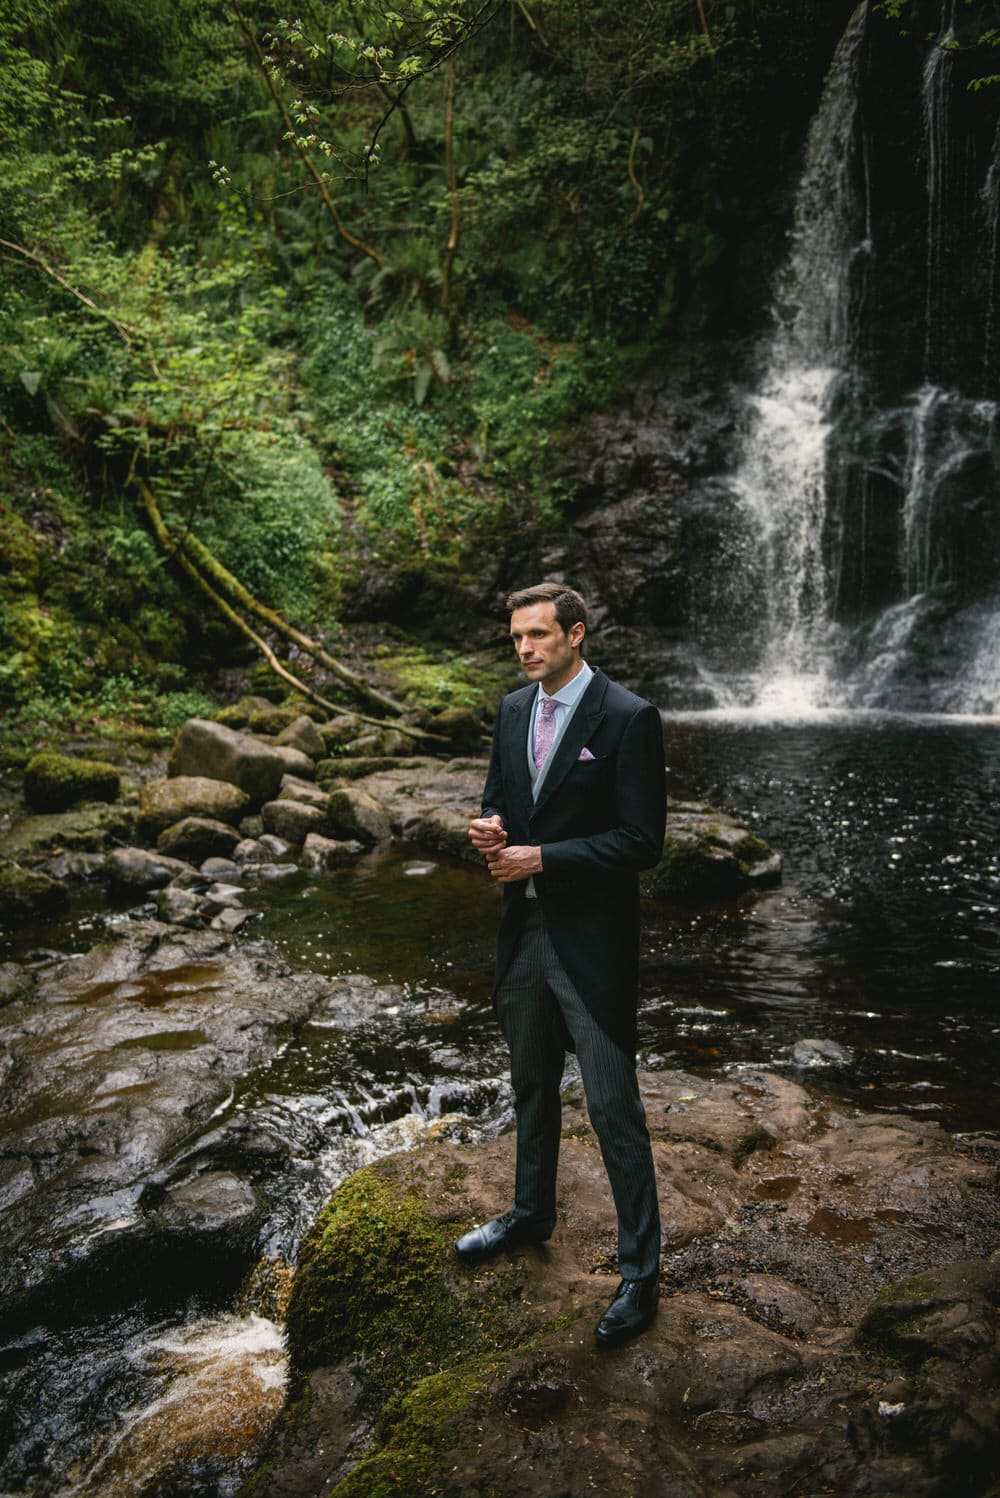 Hidden waterfall in the magical forest of their Northern Ireland elopement.